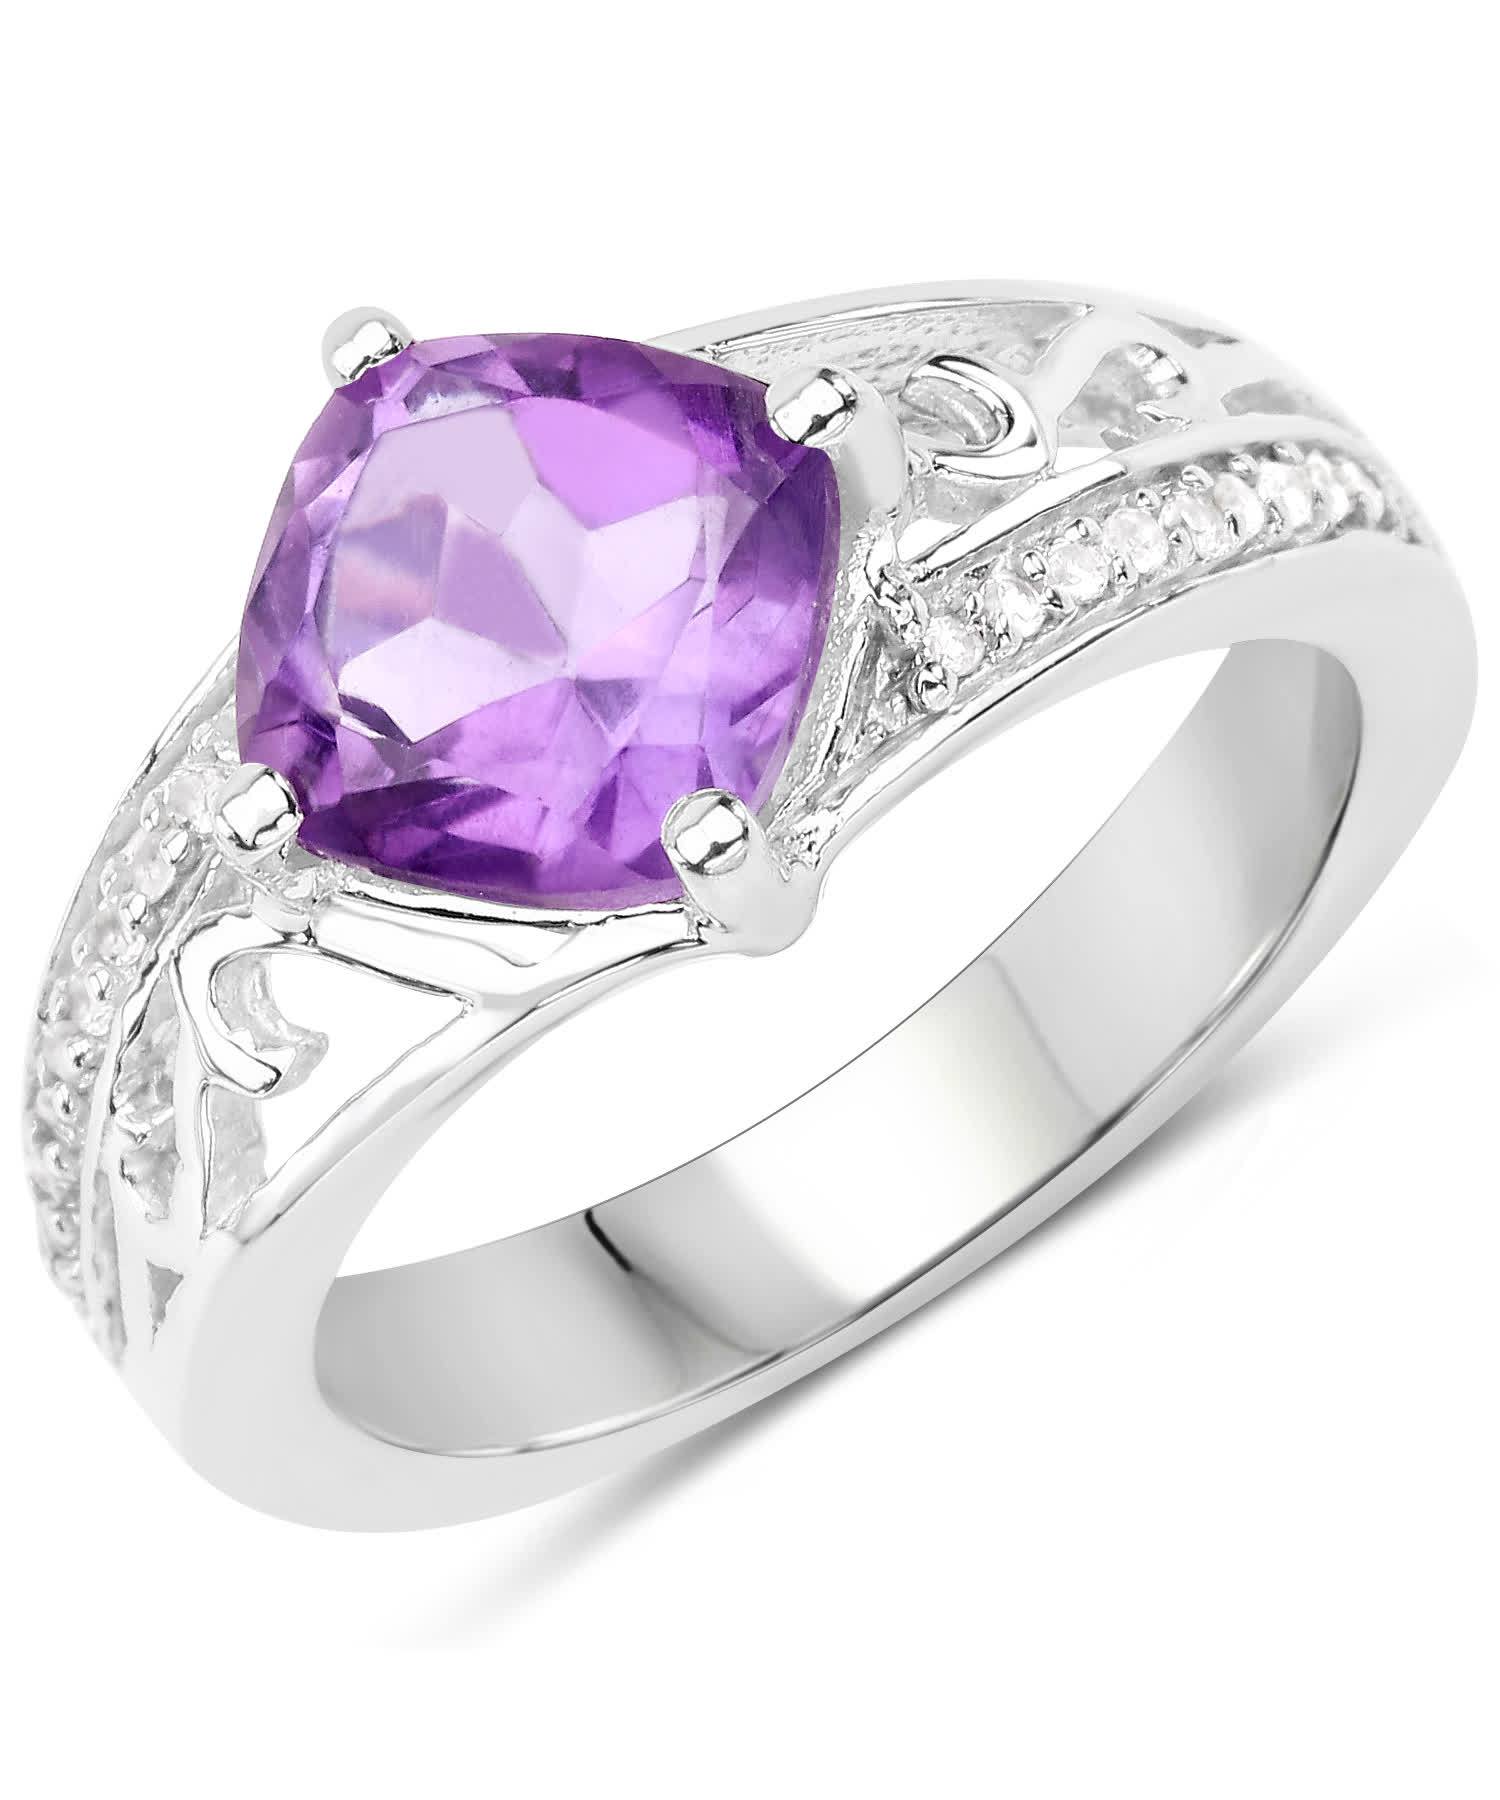 1.90ctw Natural Amethyst and Topaz Rhodium Plated 925 Sterling Silver Ring View 1